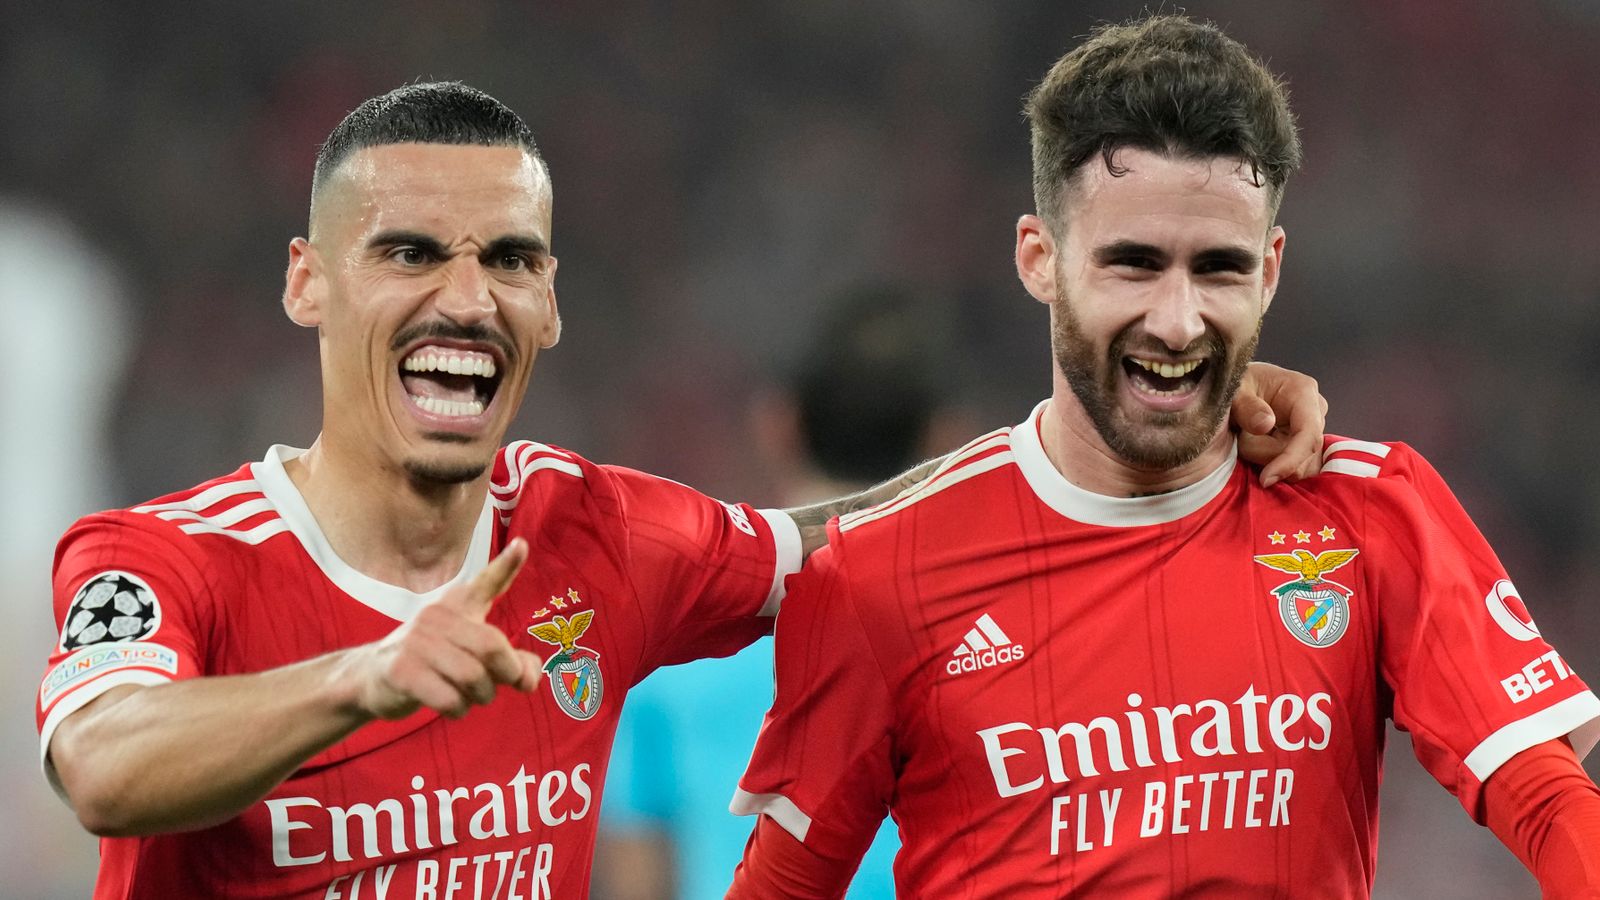 Benfica 5-1 Club Brugge (agg 7-1): Scott Parker suffers hammering as  Goncalo Ramos scores twice, Football News